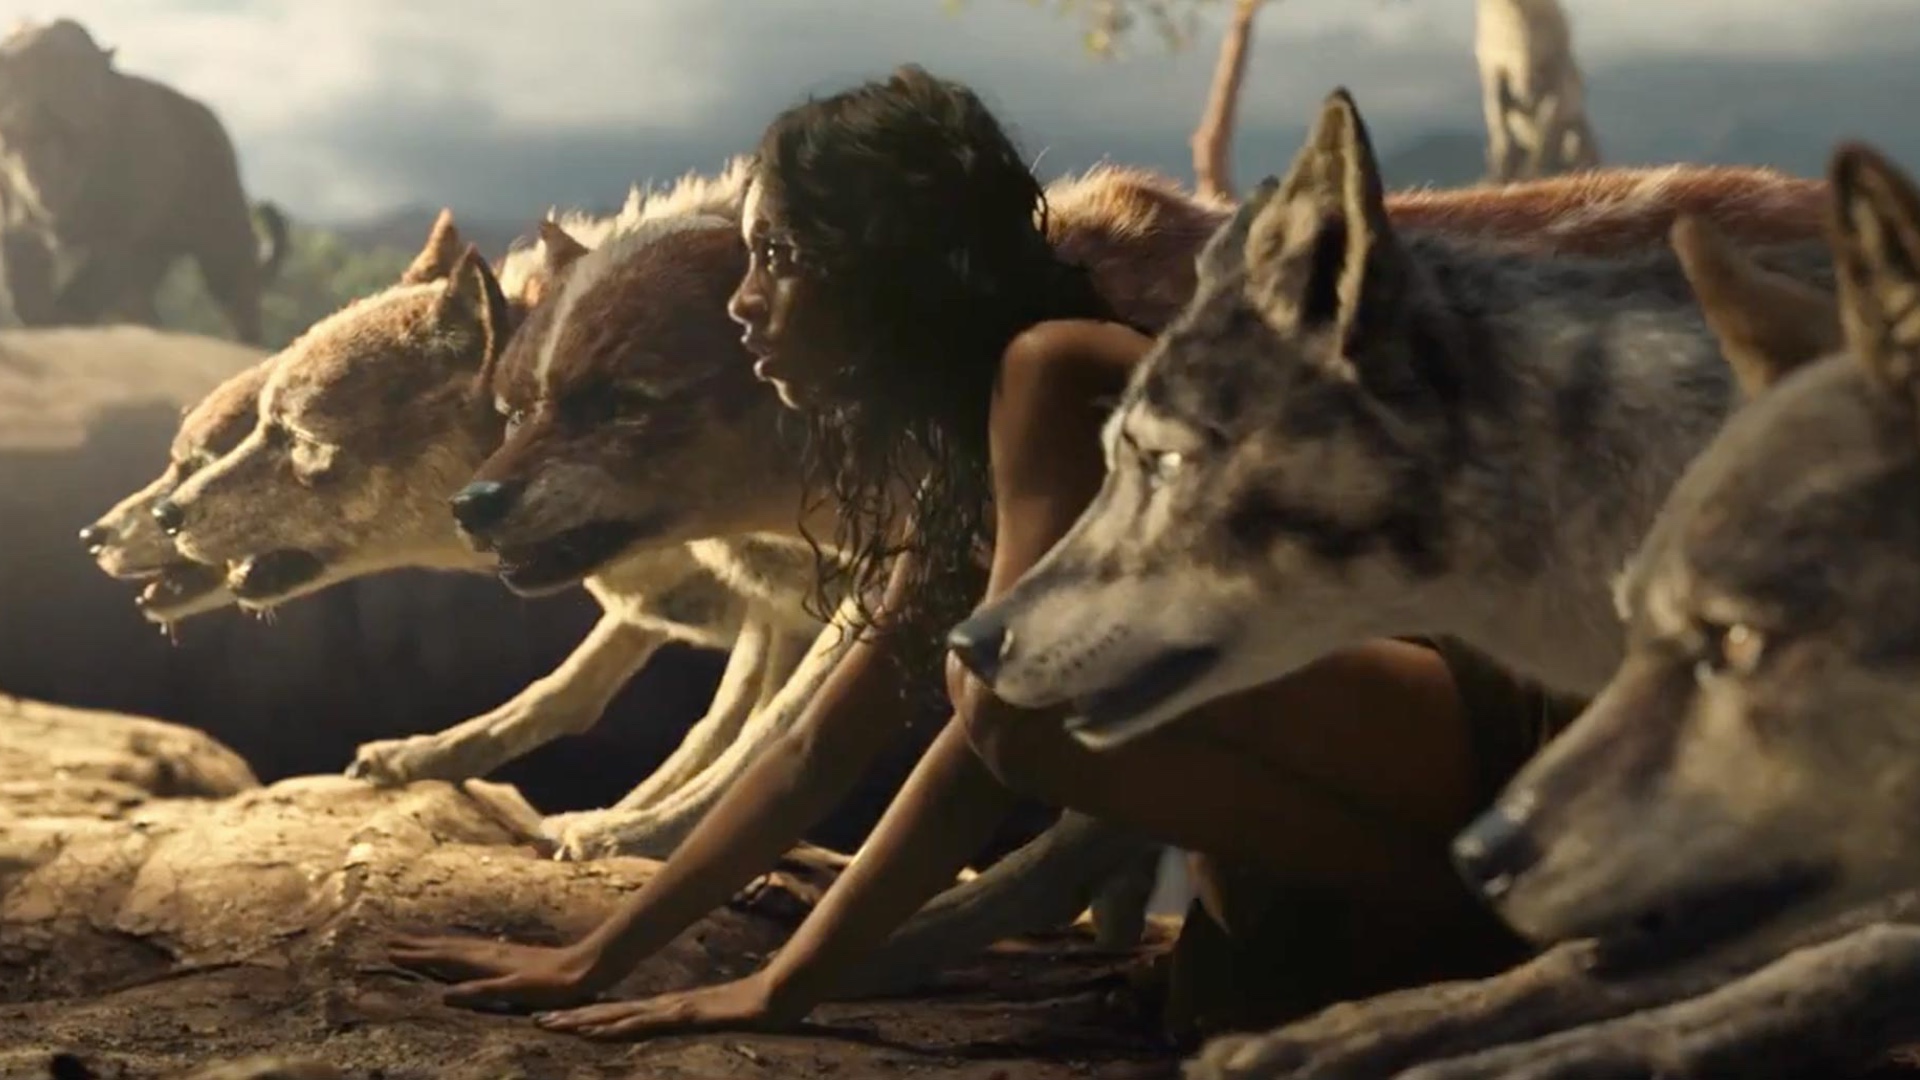 Andy Serkis Jungle Book Film MOWGLI is Now Being Released on